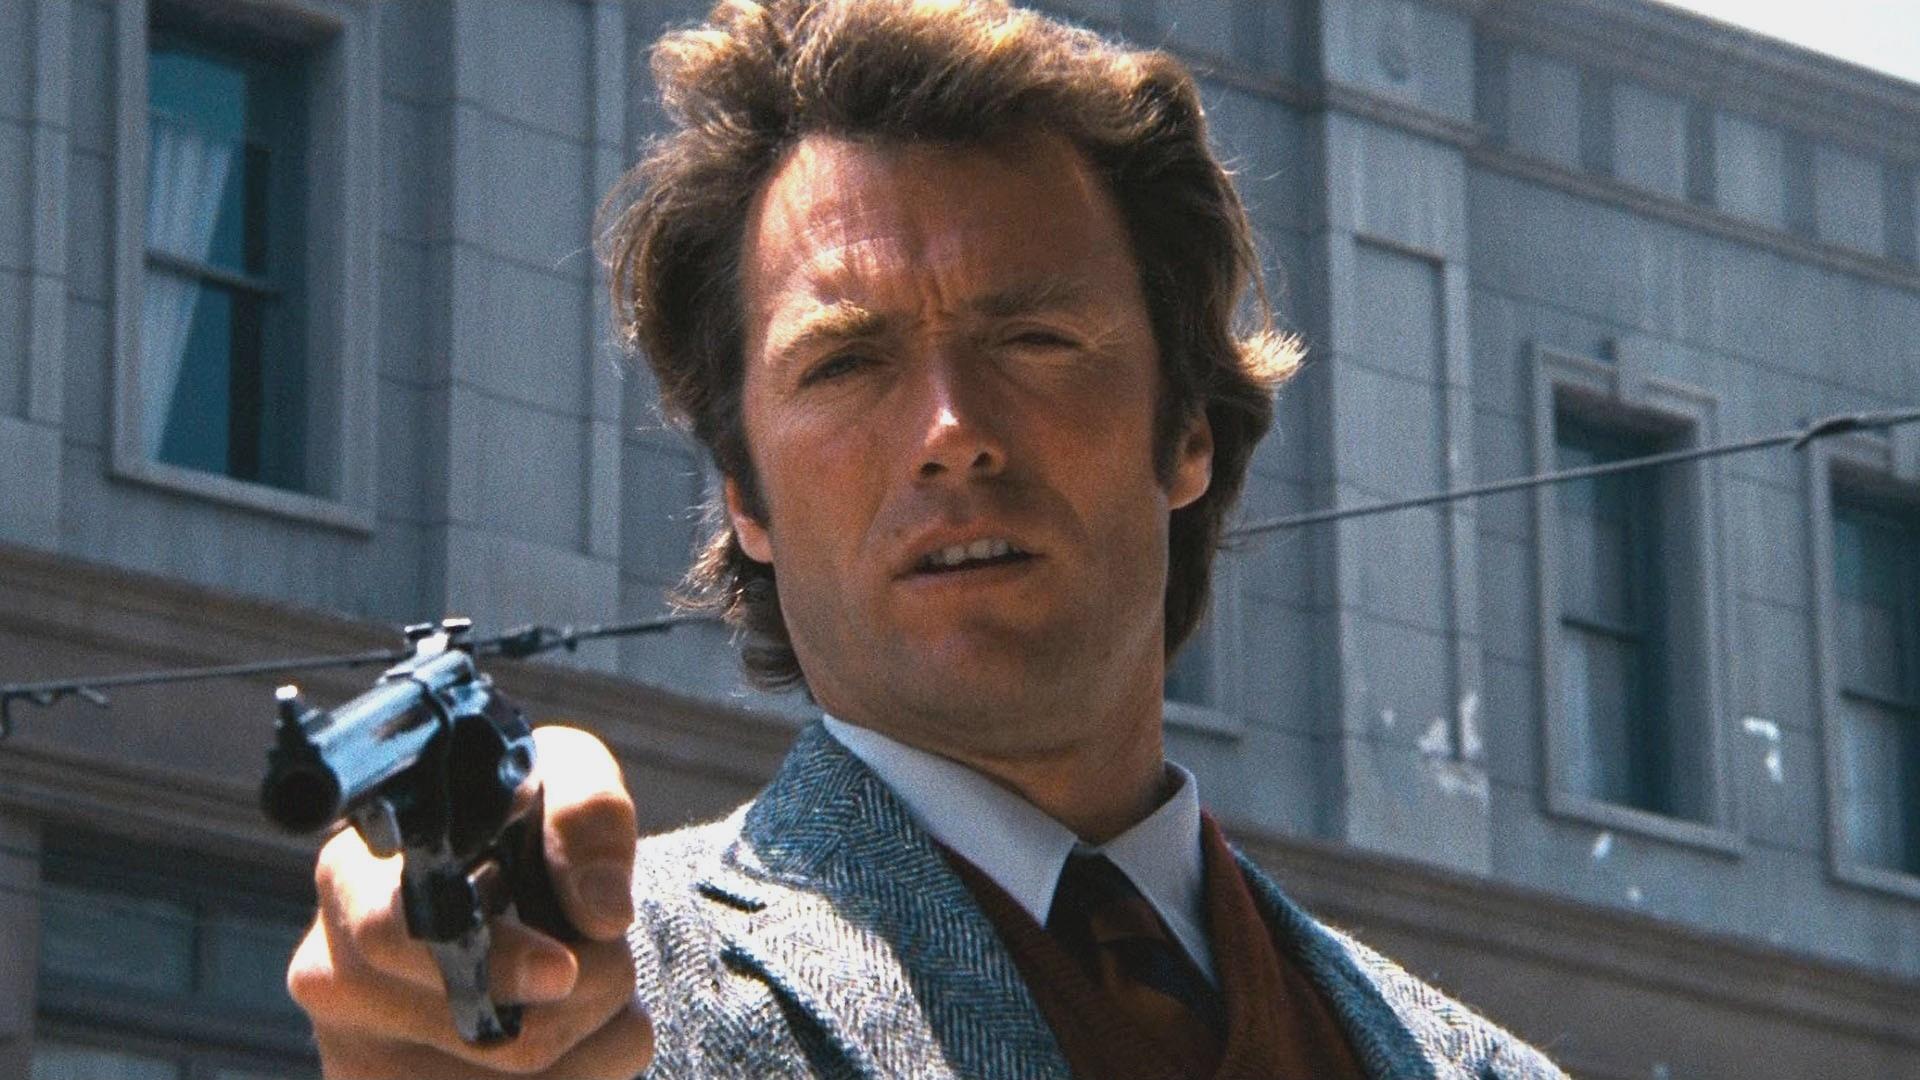 100+] Clint Eastwood Wallpapers | Wallpapers.com